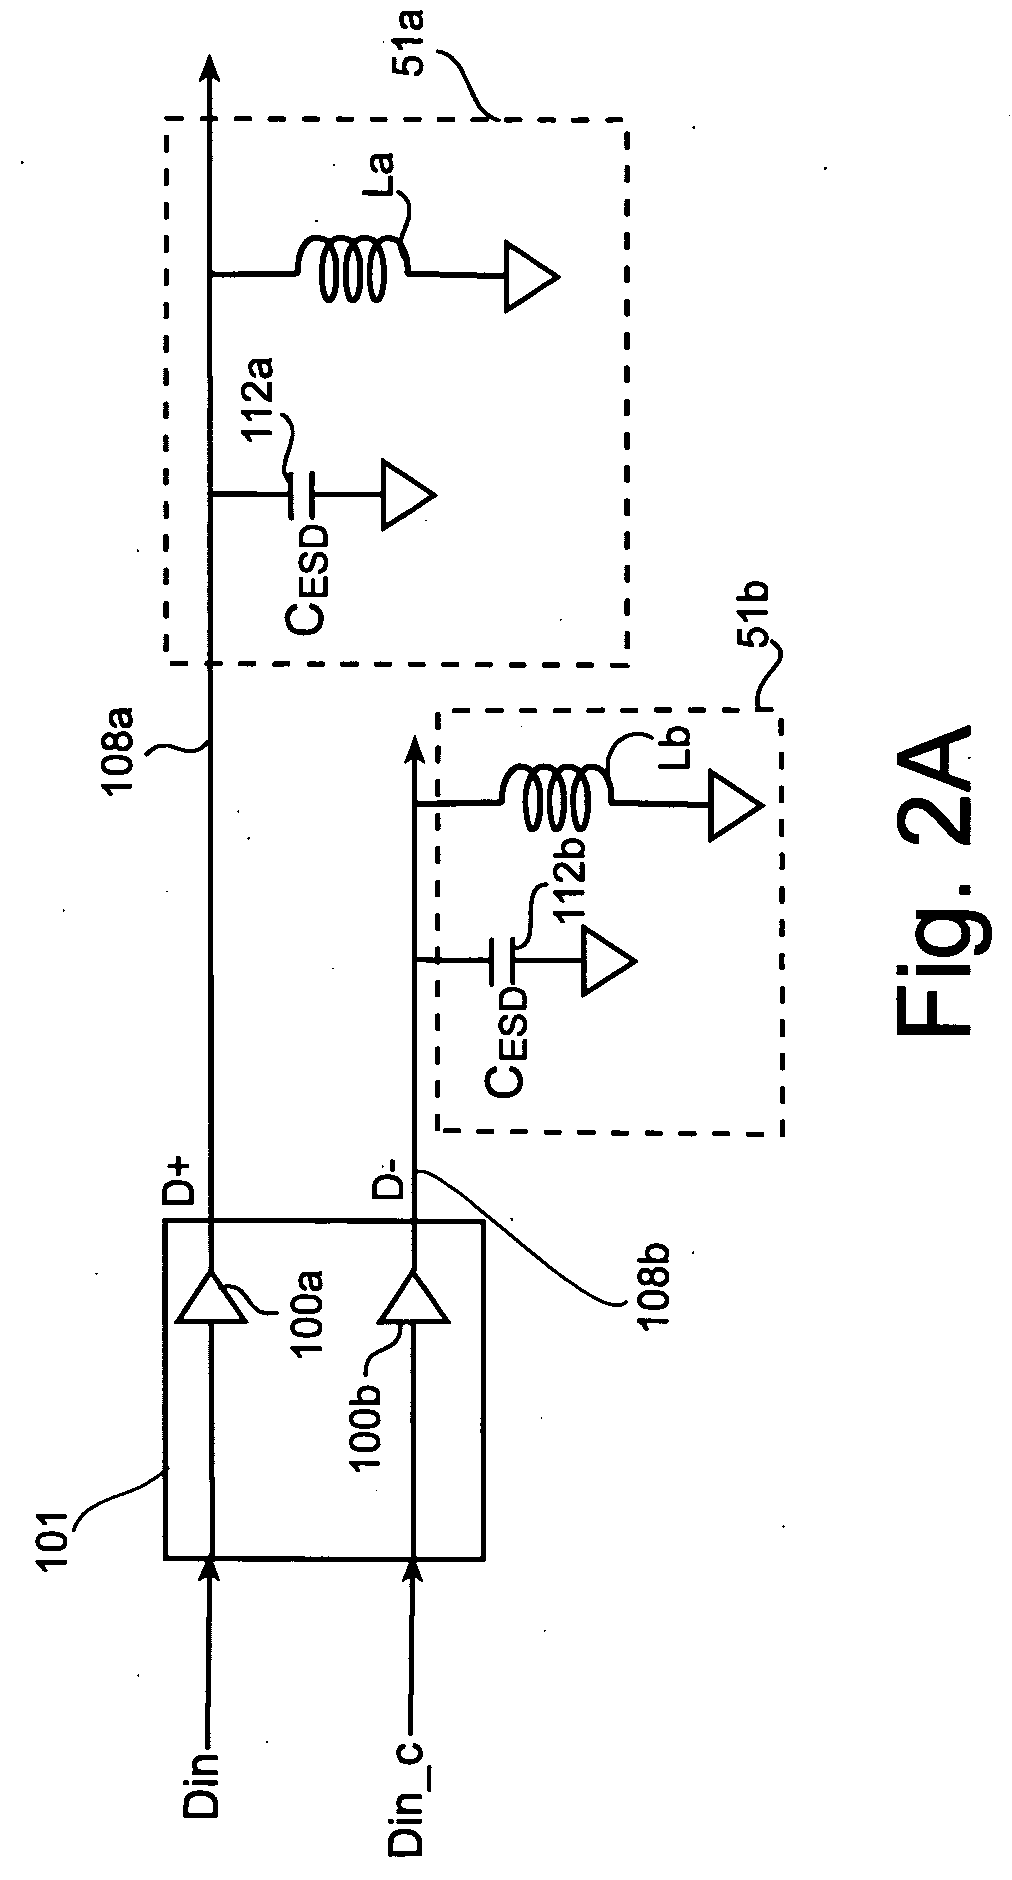 Methods and systems for rise-time improvements in differential signal outputs